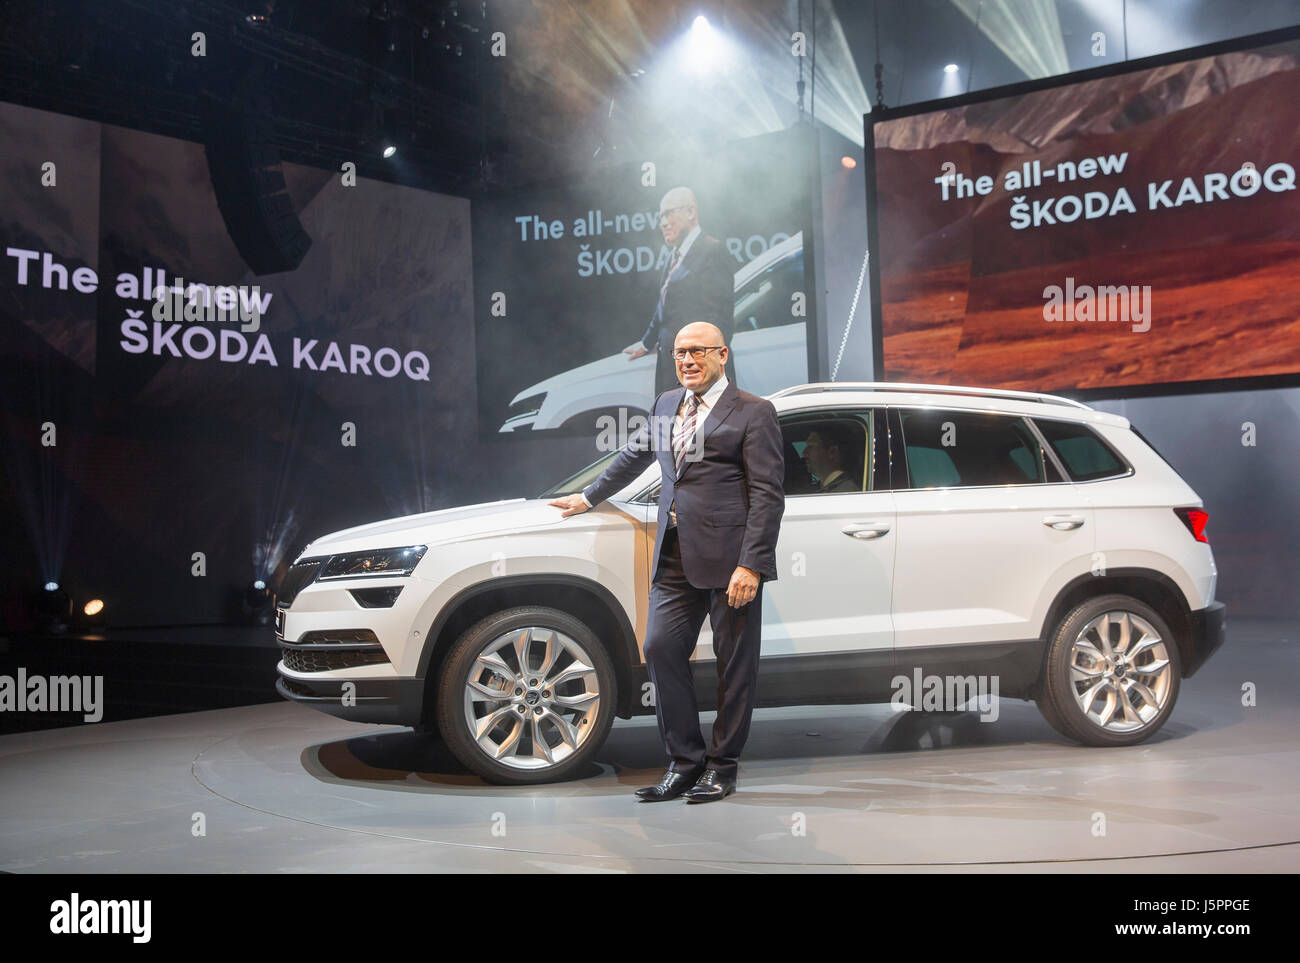 Stockholm, Sweden. 18th May, 2017. SKODA AUTO CEO Bernhard Maier presented in World Premiere The All-new SUV Skoda Karoq in Stockholm, Sweden, on Thursday, May 18th, 2017. The Kvasiny plant of Czech car manufacturer Skoda Auto will start producing the new compact SUV Skoda Karoq at the end of July, Karoq is to replace the Yeti model. Credit: Petr Mlch/CTK Photo/Alamy Live News Stock Photo